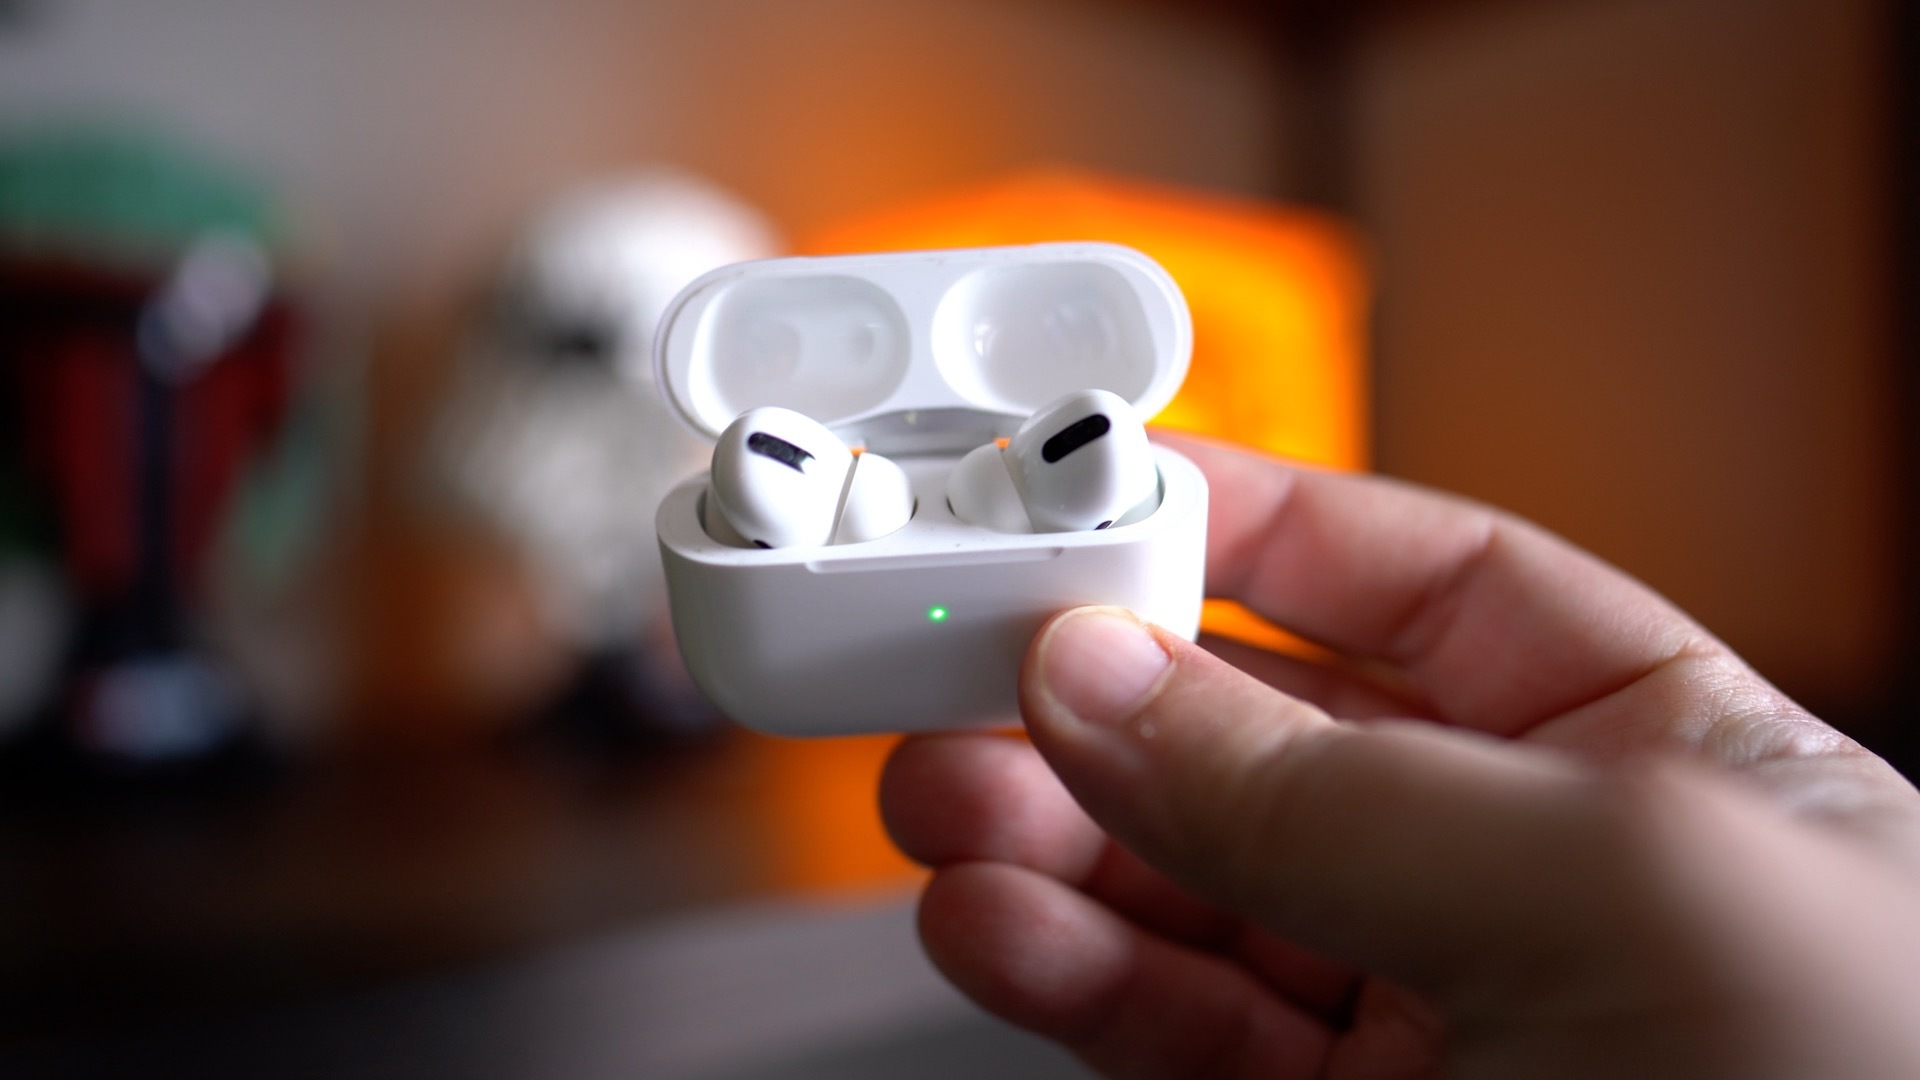 Second-Generation AirPods Pro Charging Case Expected to Stick With Lightning Port